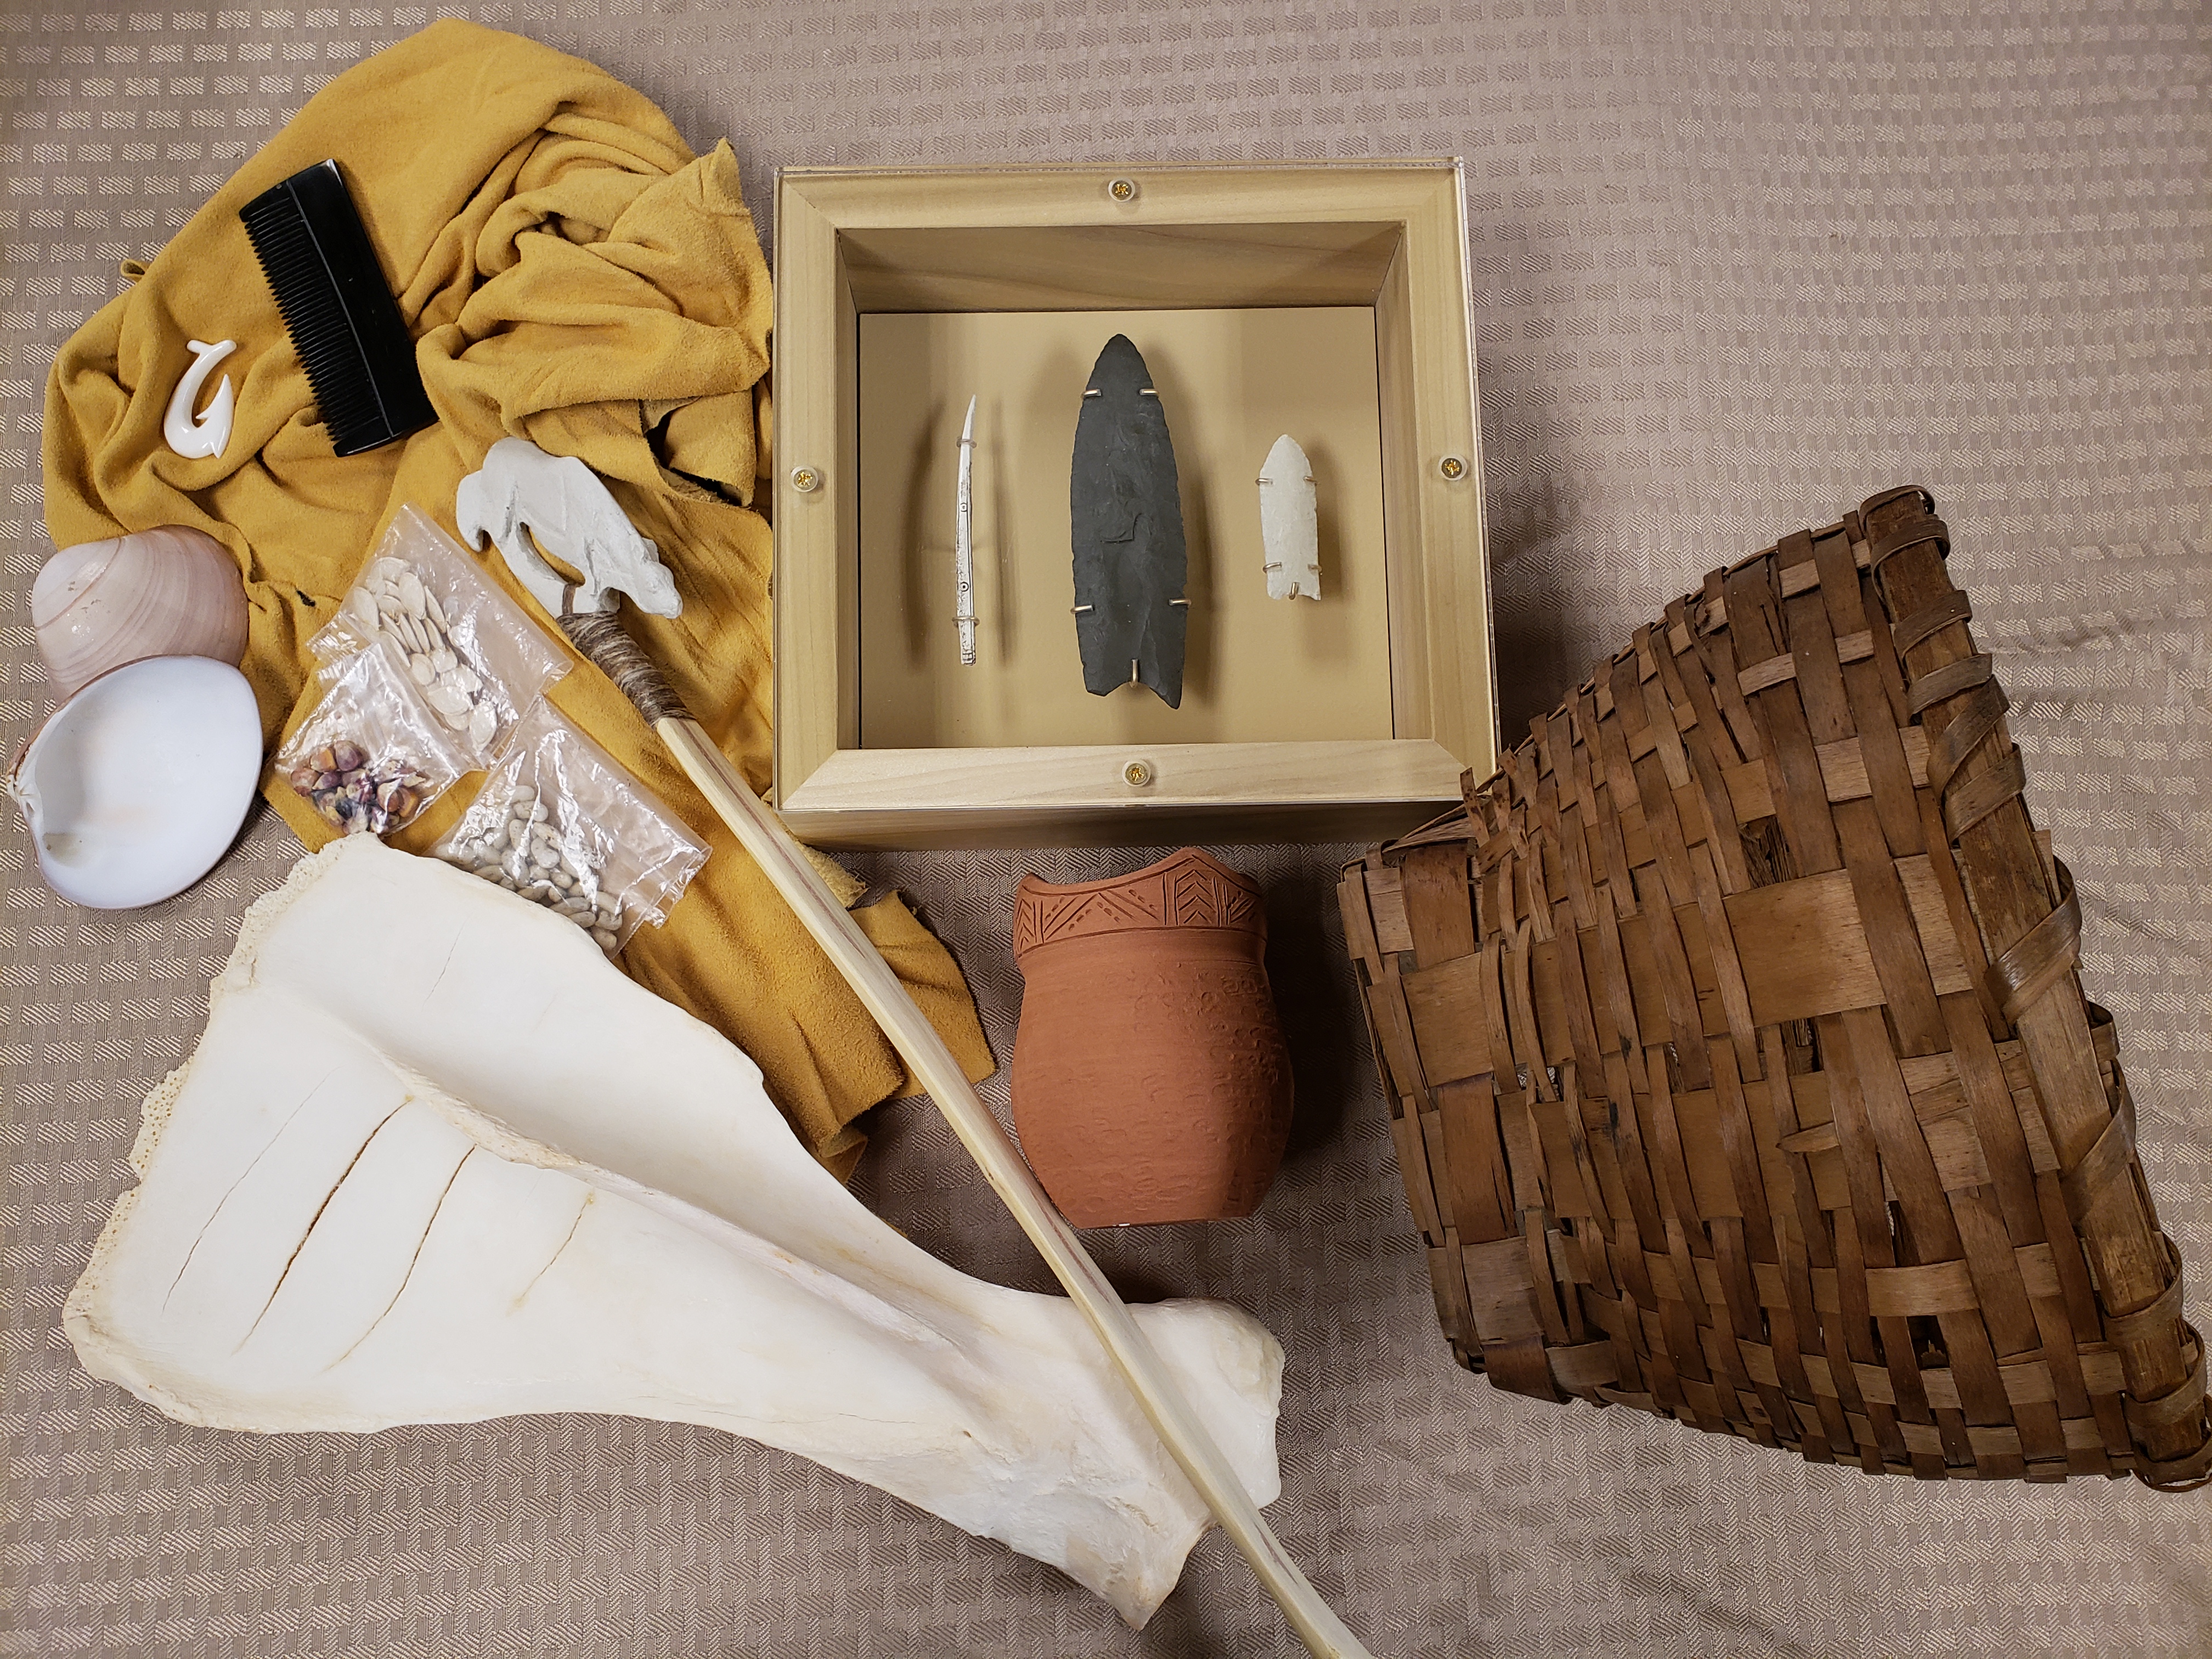 Educational items used to discuss early peoples in Wisconsin